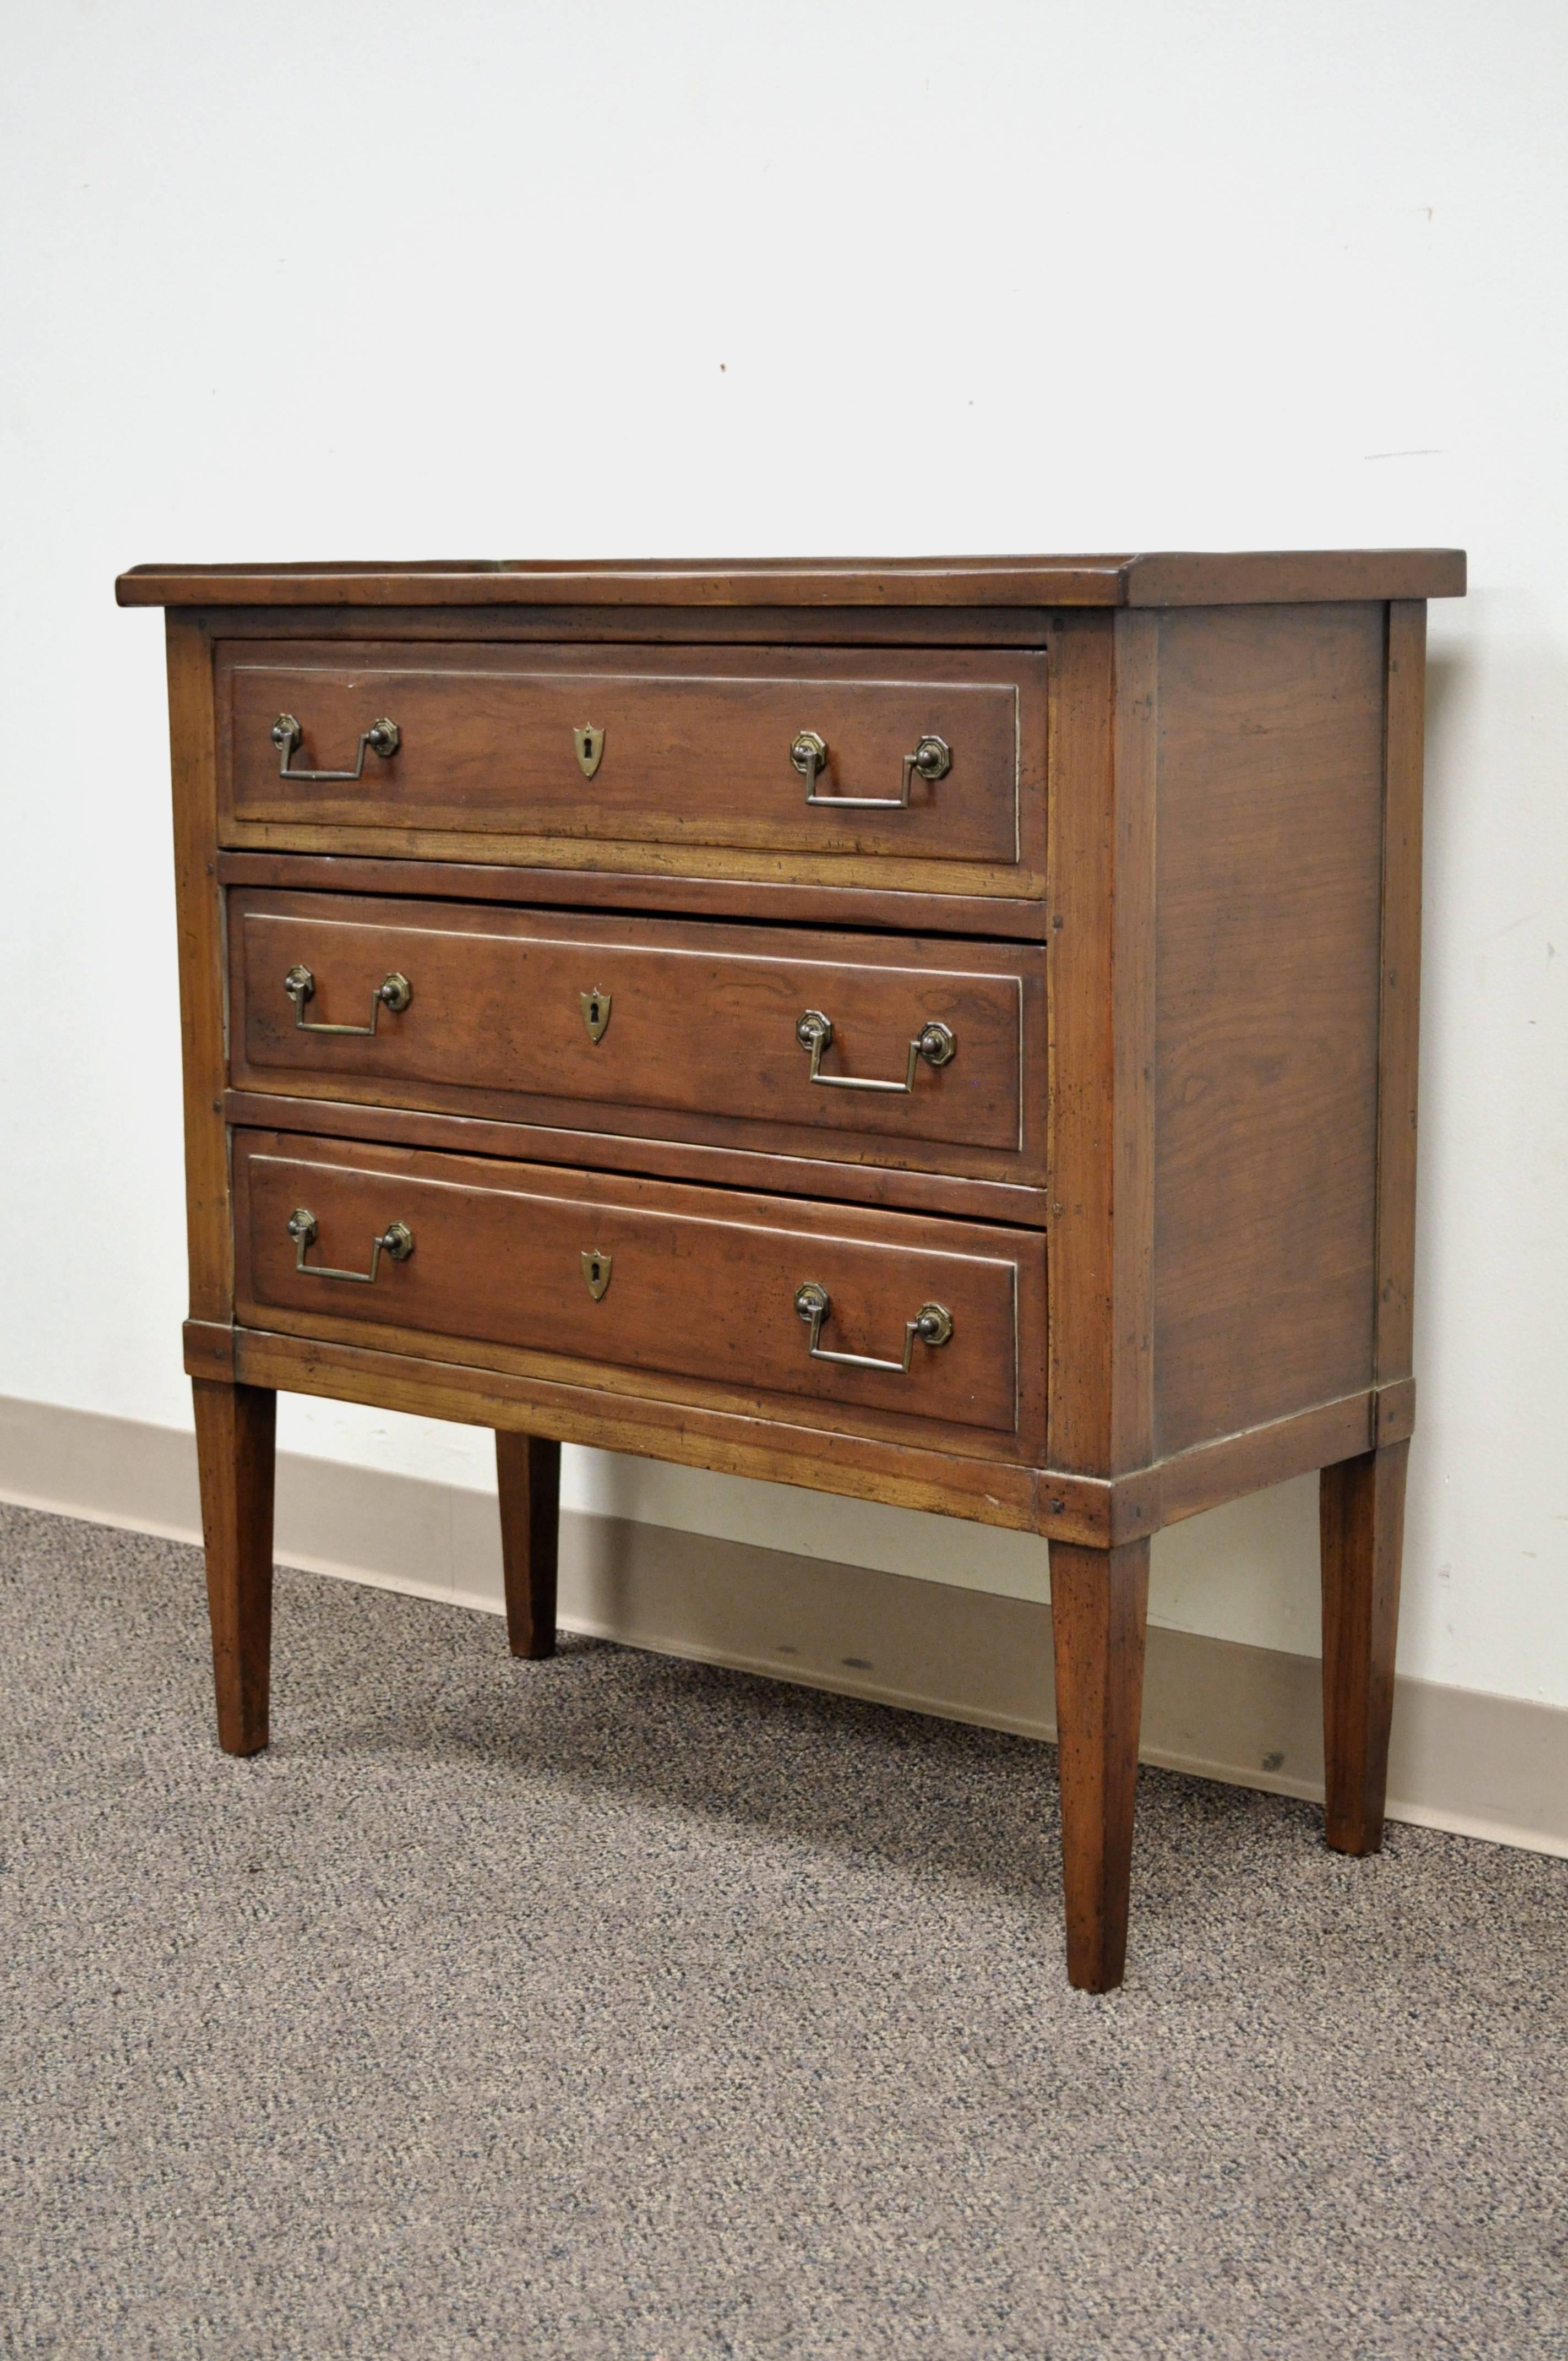 Remarkable quality custom-made solid cherry French Directoire style commode or bachelor chest by Customwood of Harrison, NY. Item features three dovetail constructed drawers, gallery top, lined drawers, solid brass hardware, exposed wood pin